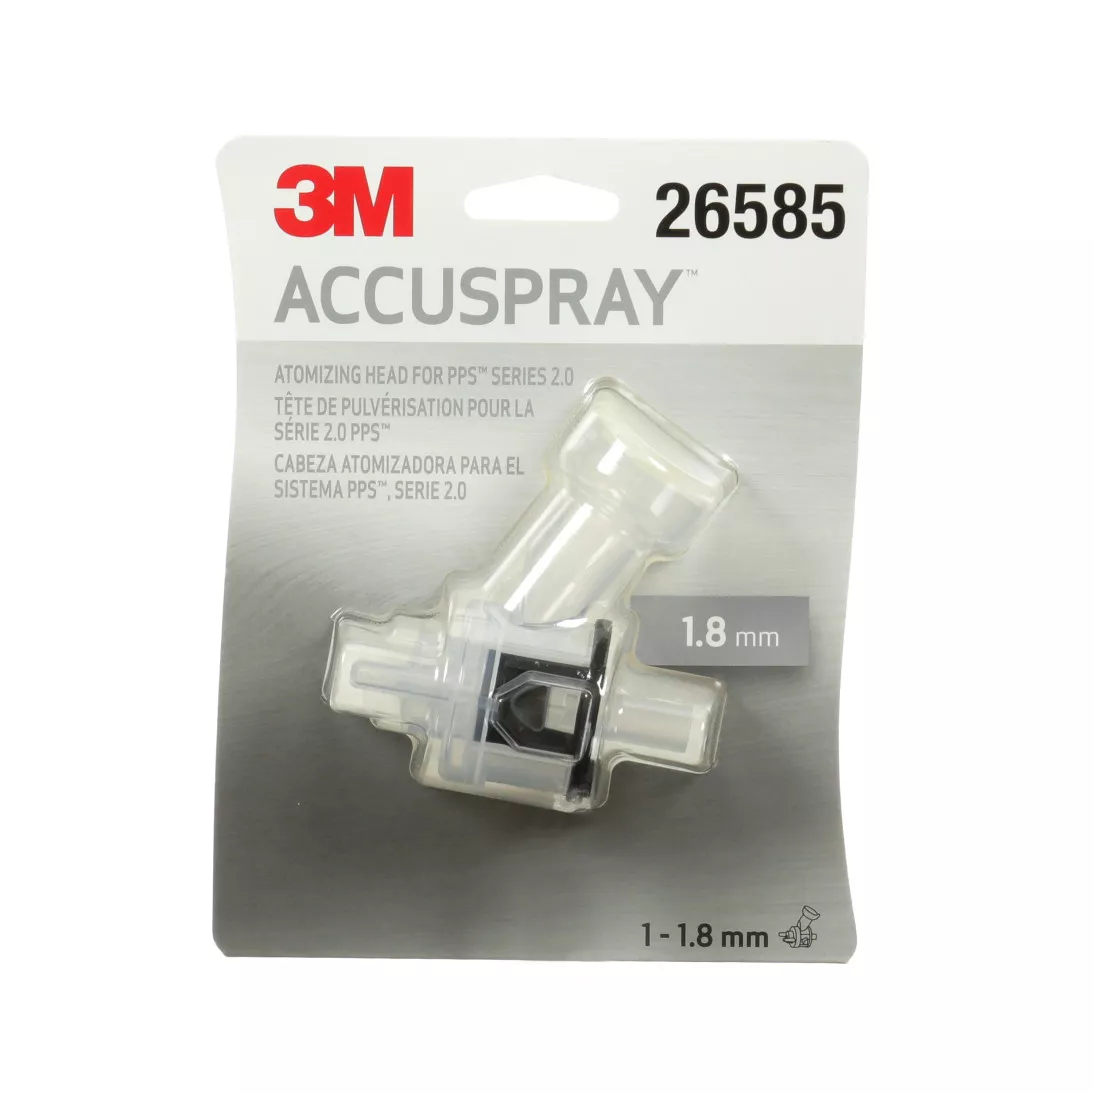 3M™ Accuspray™ Atomizing Head Refill Pack for 3M™ PPS™ Series 2.0,
26585, Clear, 1.8 mm, 5 per case